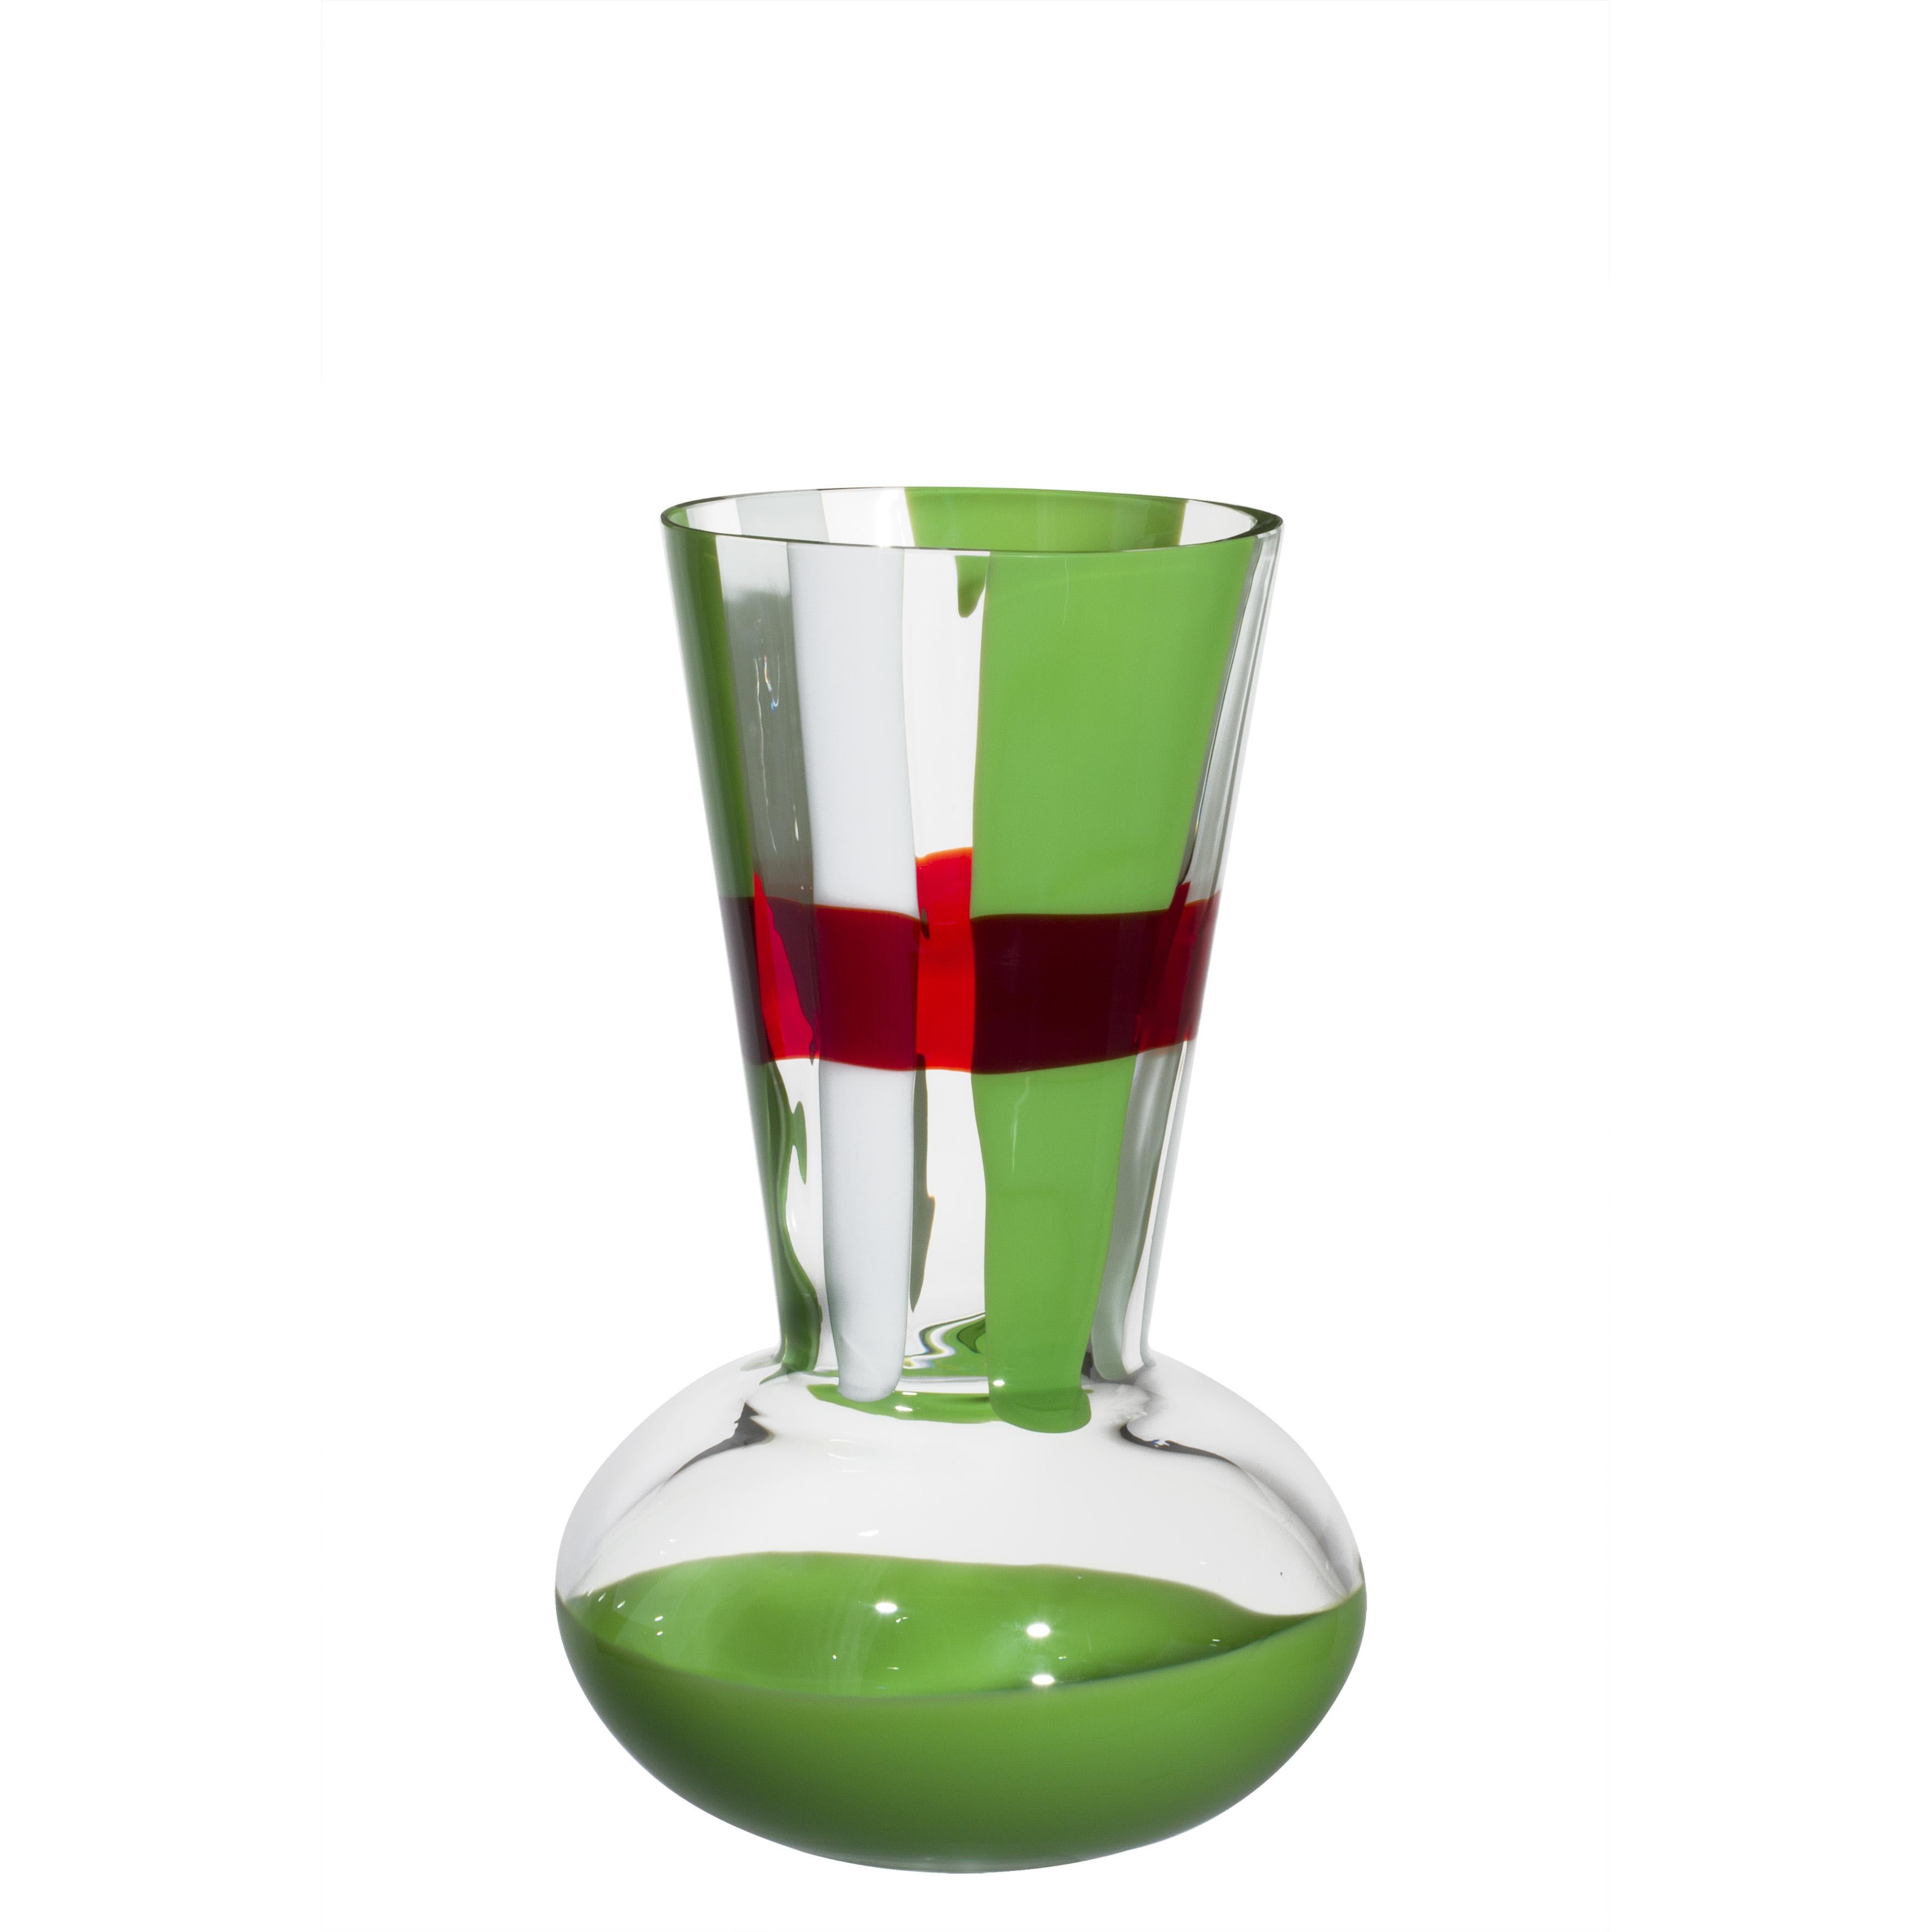 Small Troncosfera Vase in Red, Green and White by Carlo Moretti